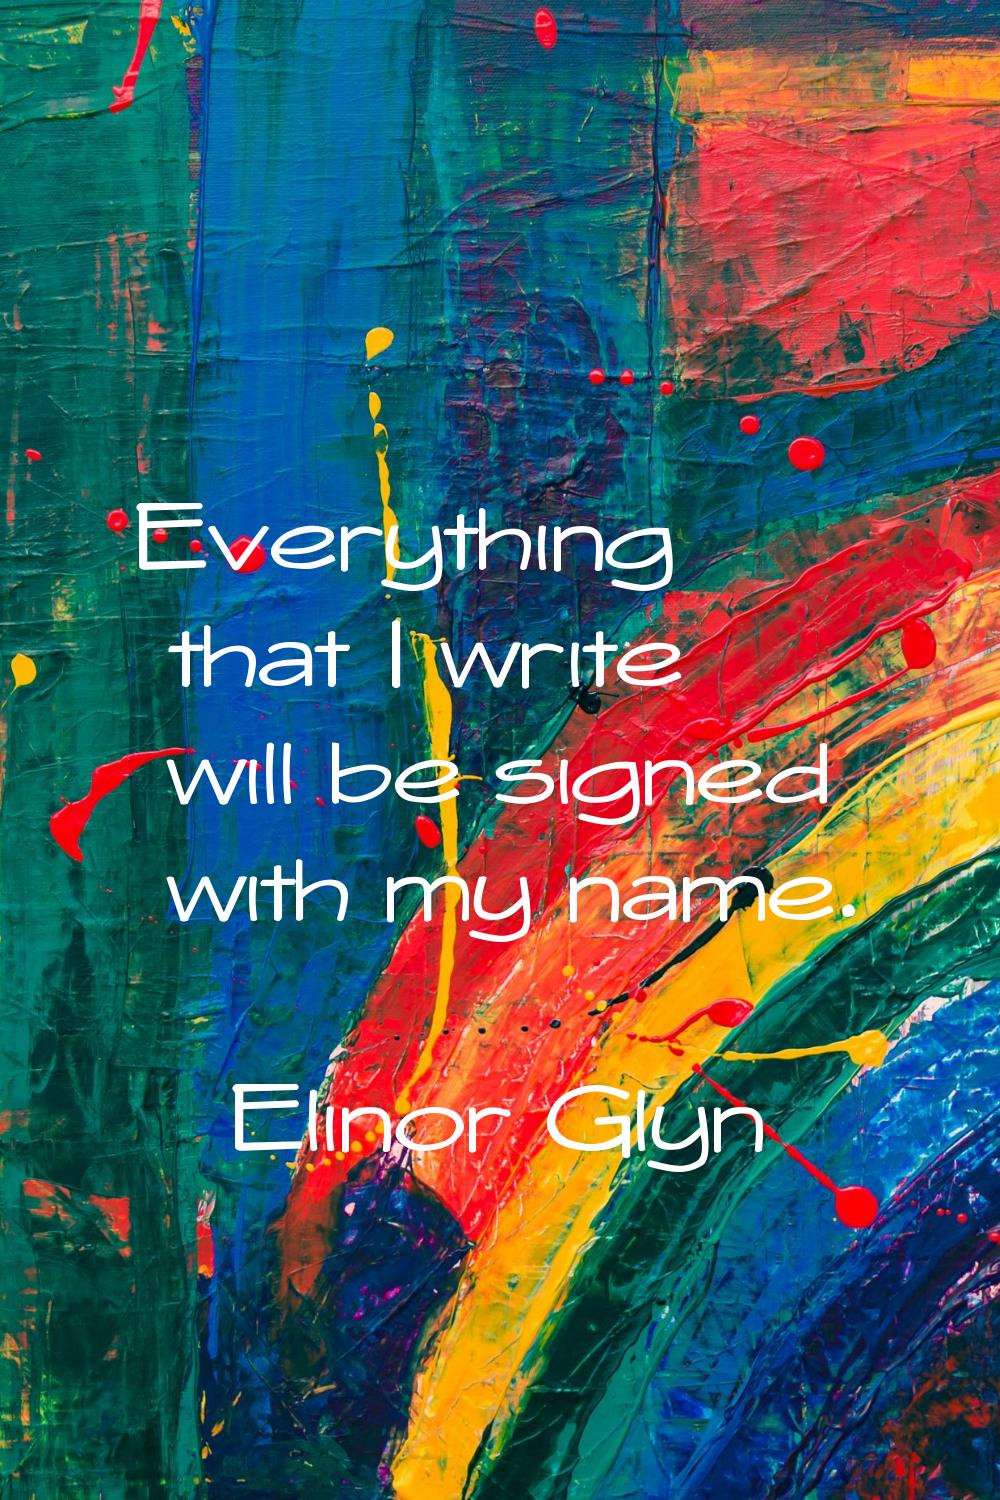 Everything that I write will be signed with my name.